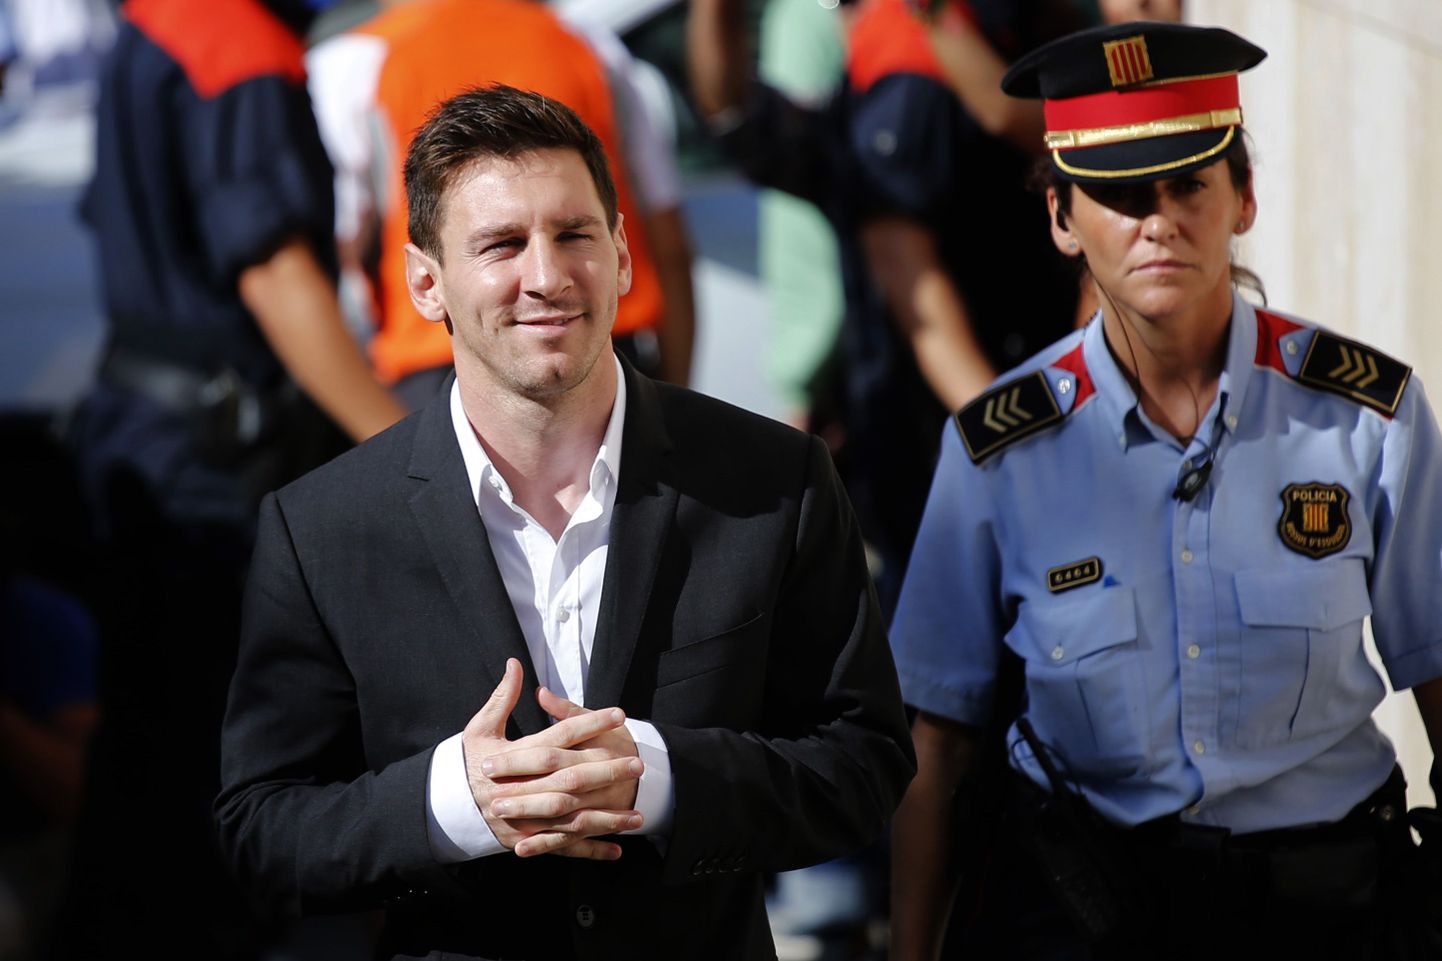 FILE - In this Sept. 27, 2013 file photo, FC Barcelona star Lionel Messi, left, arrives at a court to answer questions in a tax fraud case in Gava, near Barcelona, Spain. Lionel Messi will stand trial in Spain on three counts of tax fraud and could be sentenced to nearly two years in prison if found guilty. Court documents made public Thursday said a judge has rejected a request to clear the Barcelona player of wrongdoing and decided to charge him and his father, Jorge Horacio Messi, with tax fraud. (AP Photo/Emilio Morenatti, File)